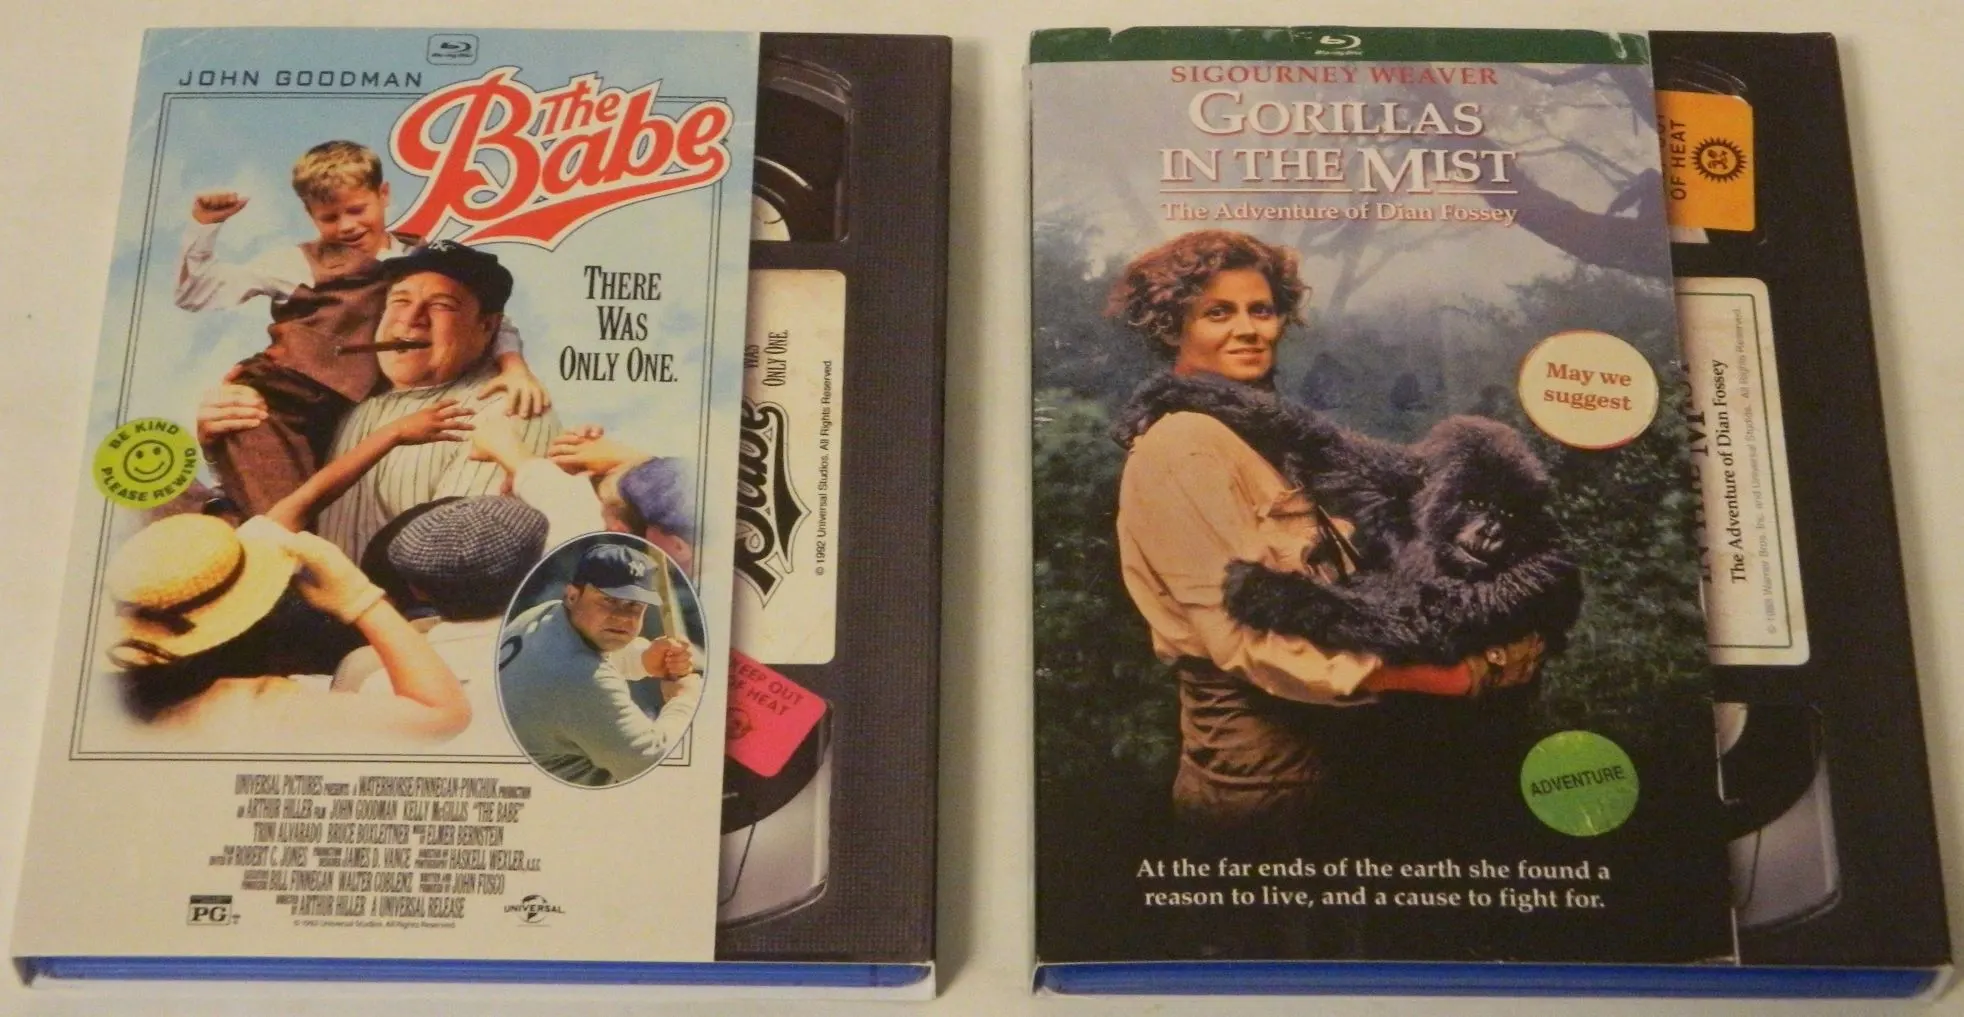 The Babe and Gorillas in the Mist Blu-rays